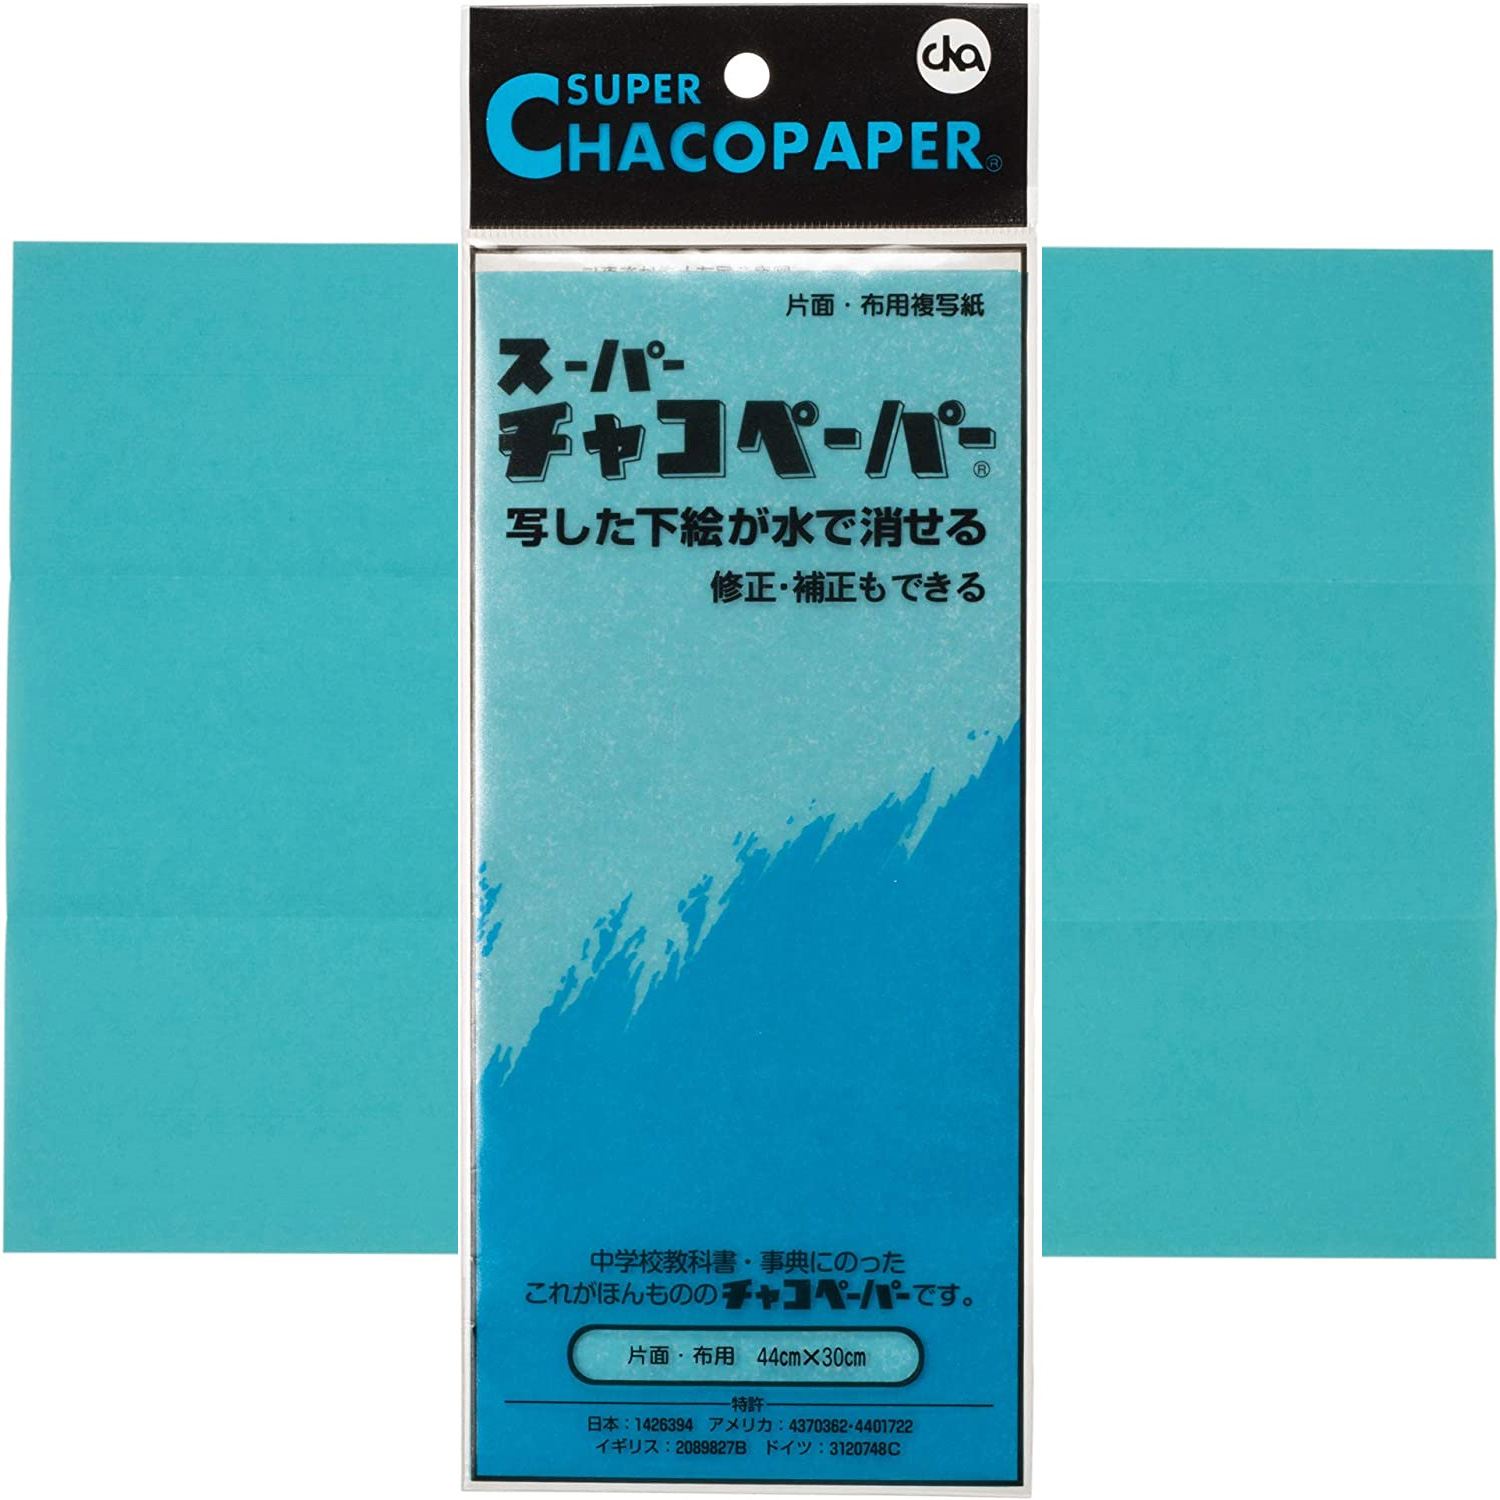 F4-11 Super Chaco Paper, One-sided Blue (pcs)